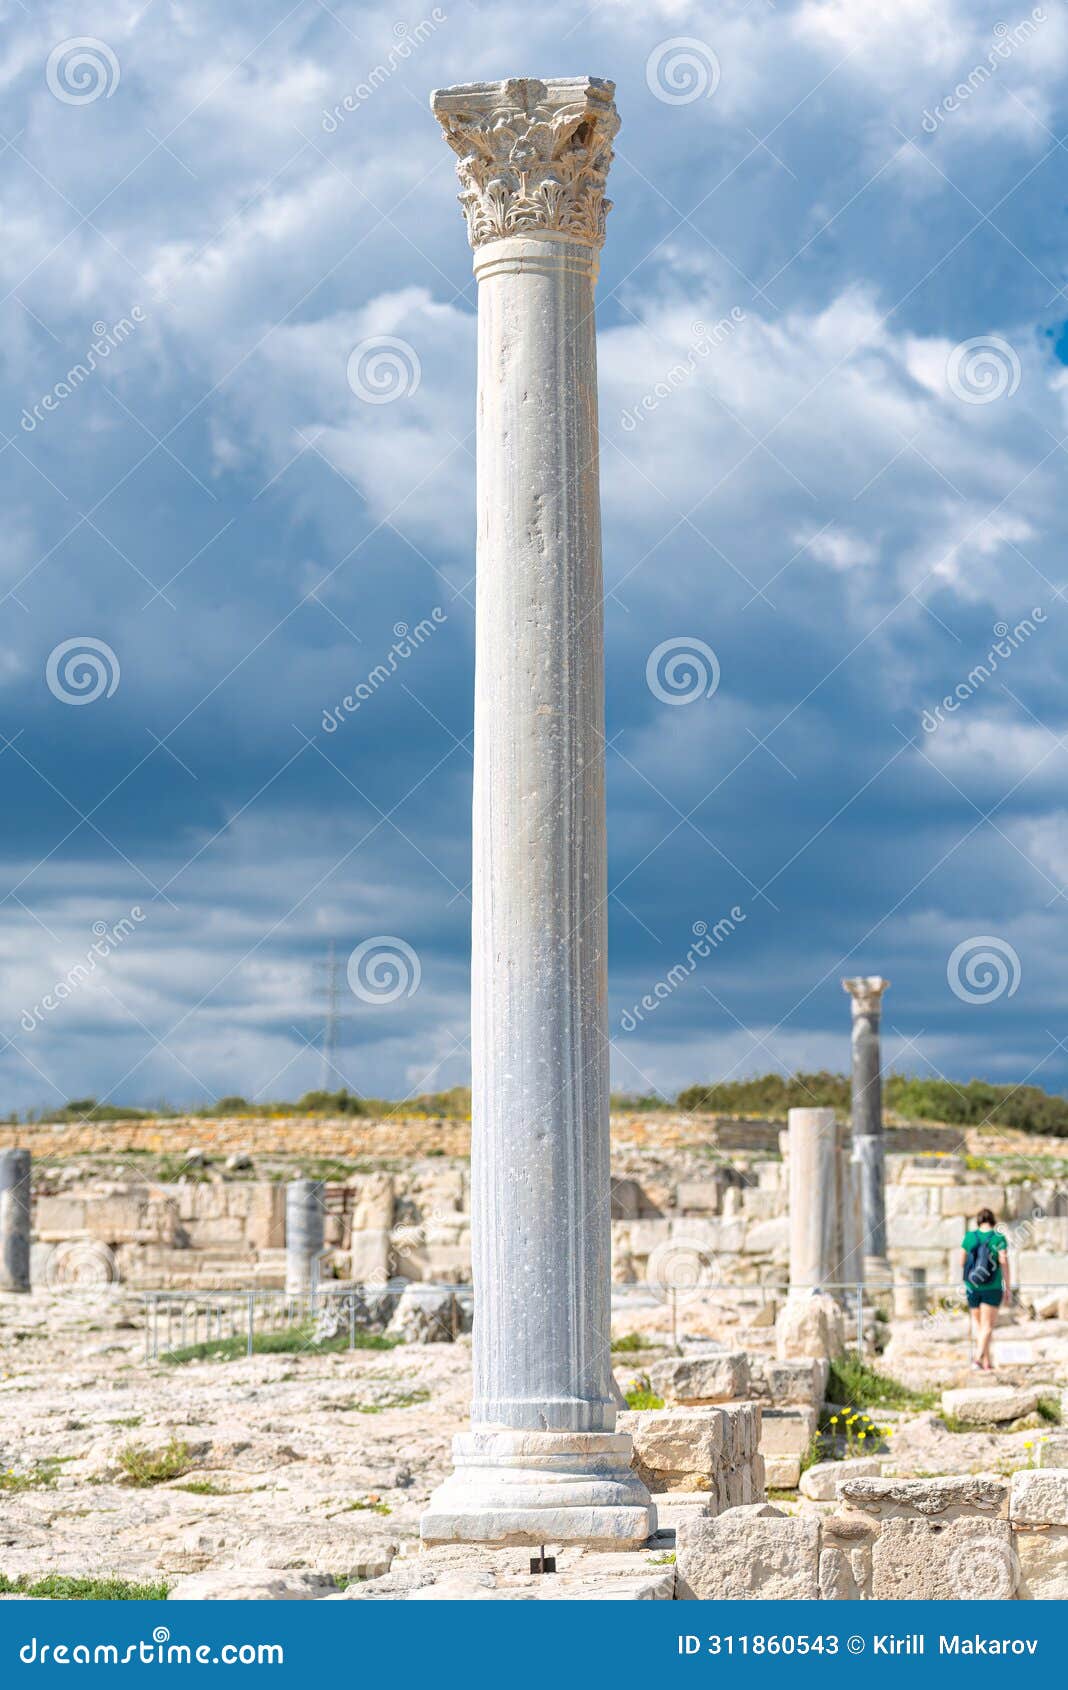 kourion archaeological site, ruins of ancient town. limassol district, cyprus